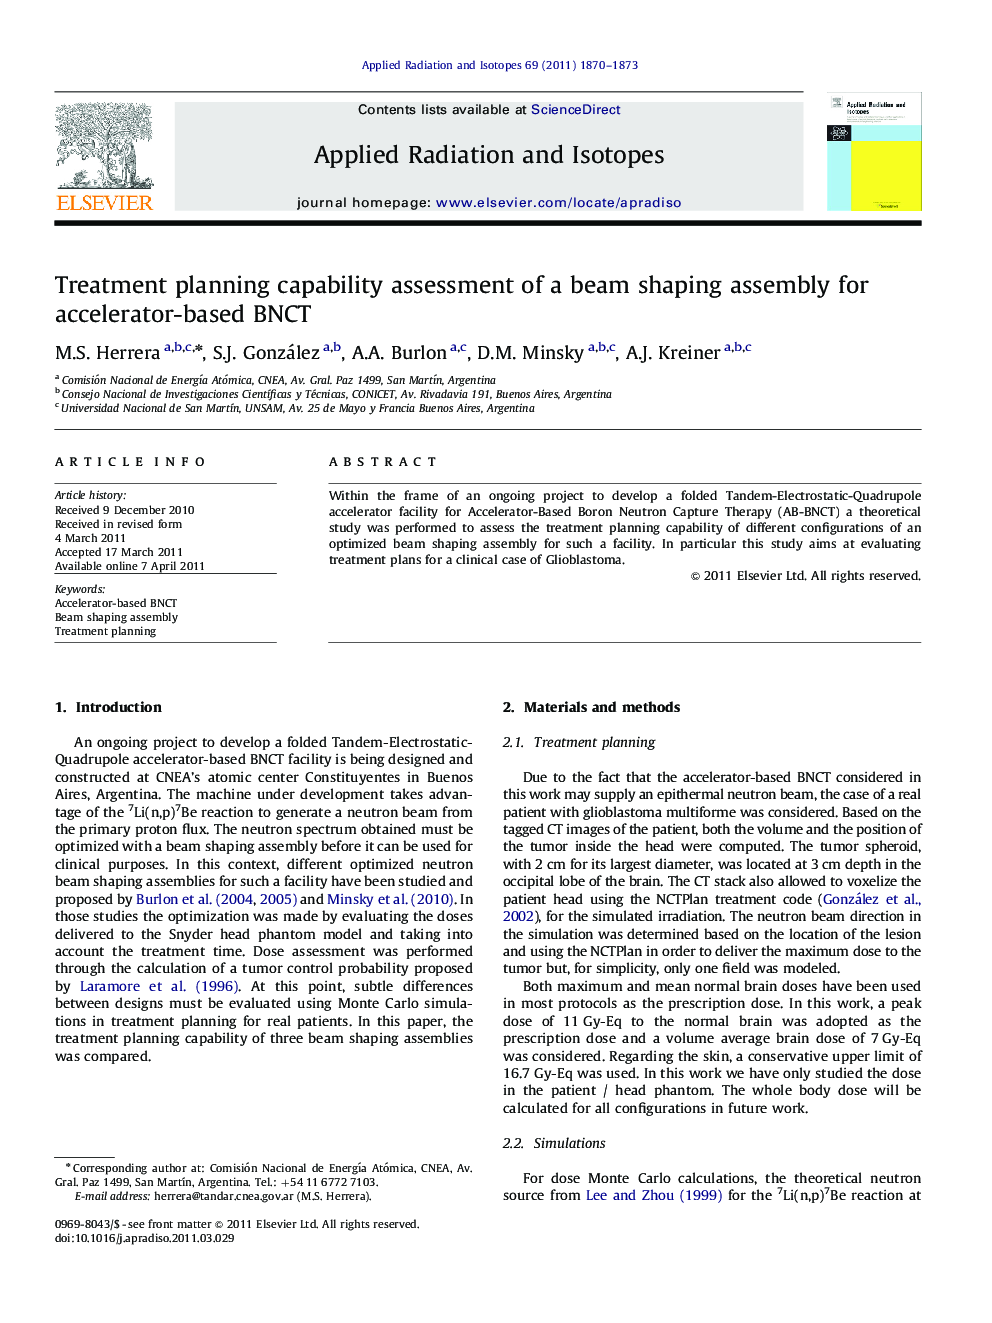 Treatment planning capability assessment of a beam shaping assembly for accelerator-based BNCT